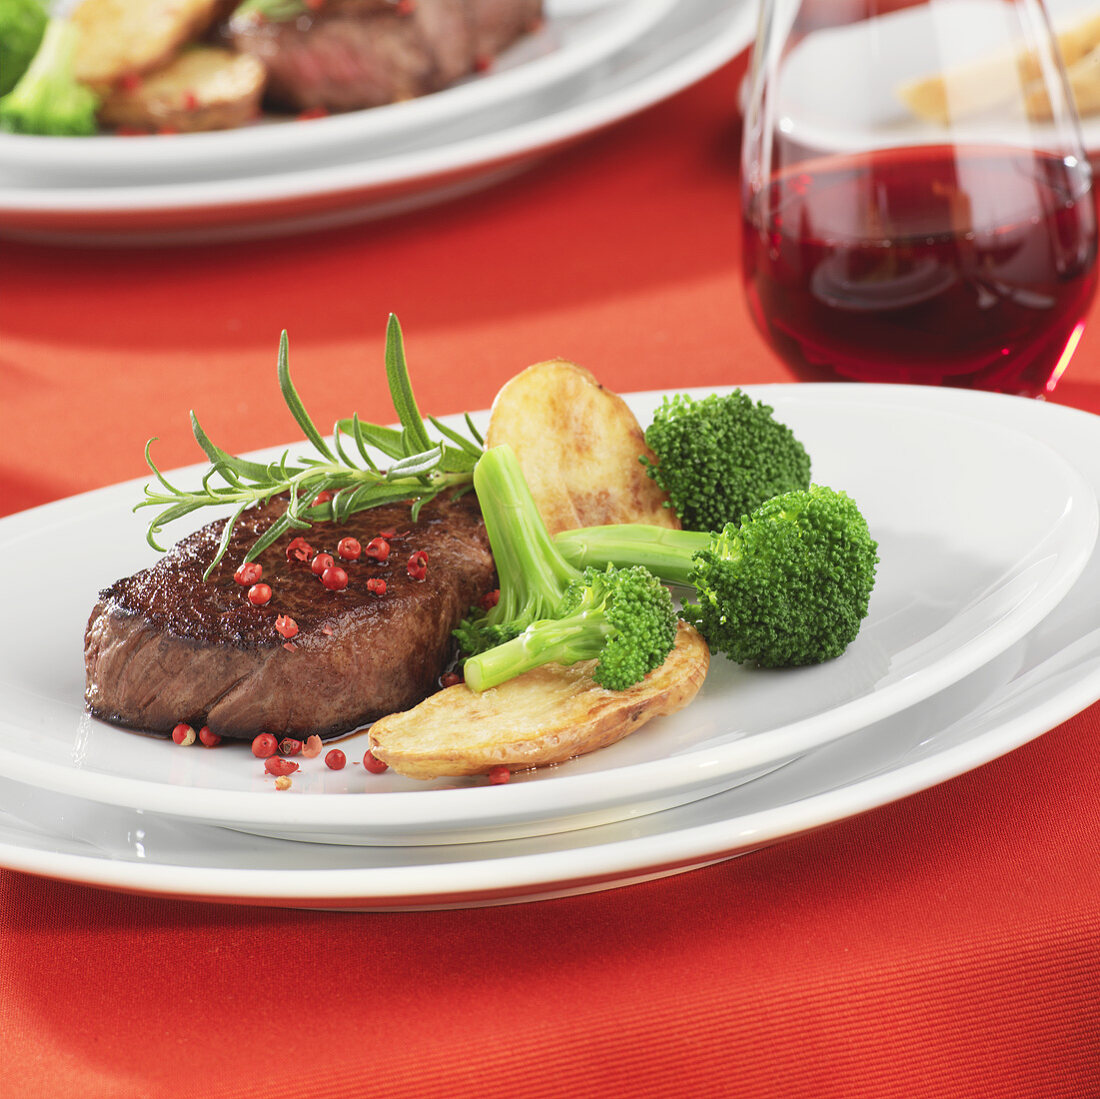 Beef steak with pink peppercorns and vegetables